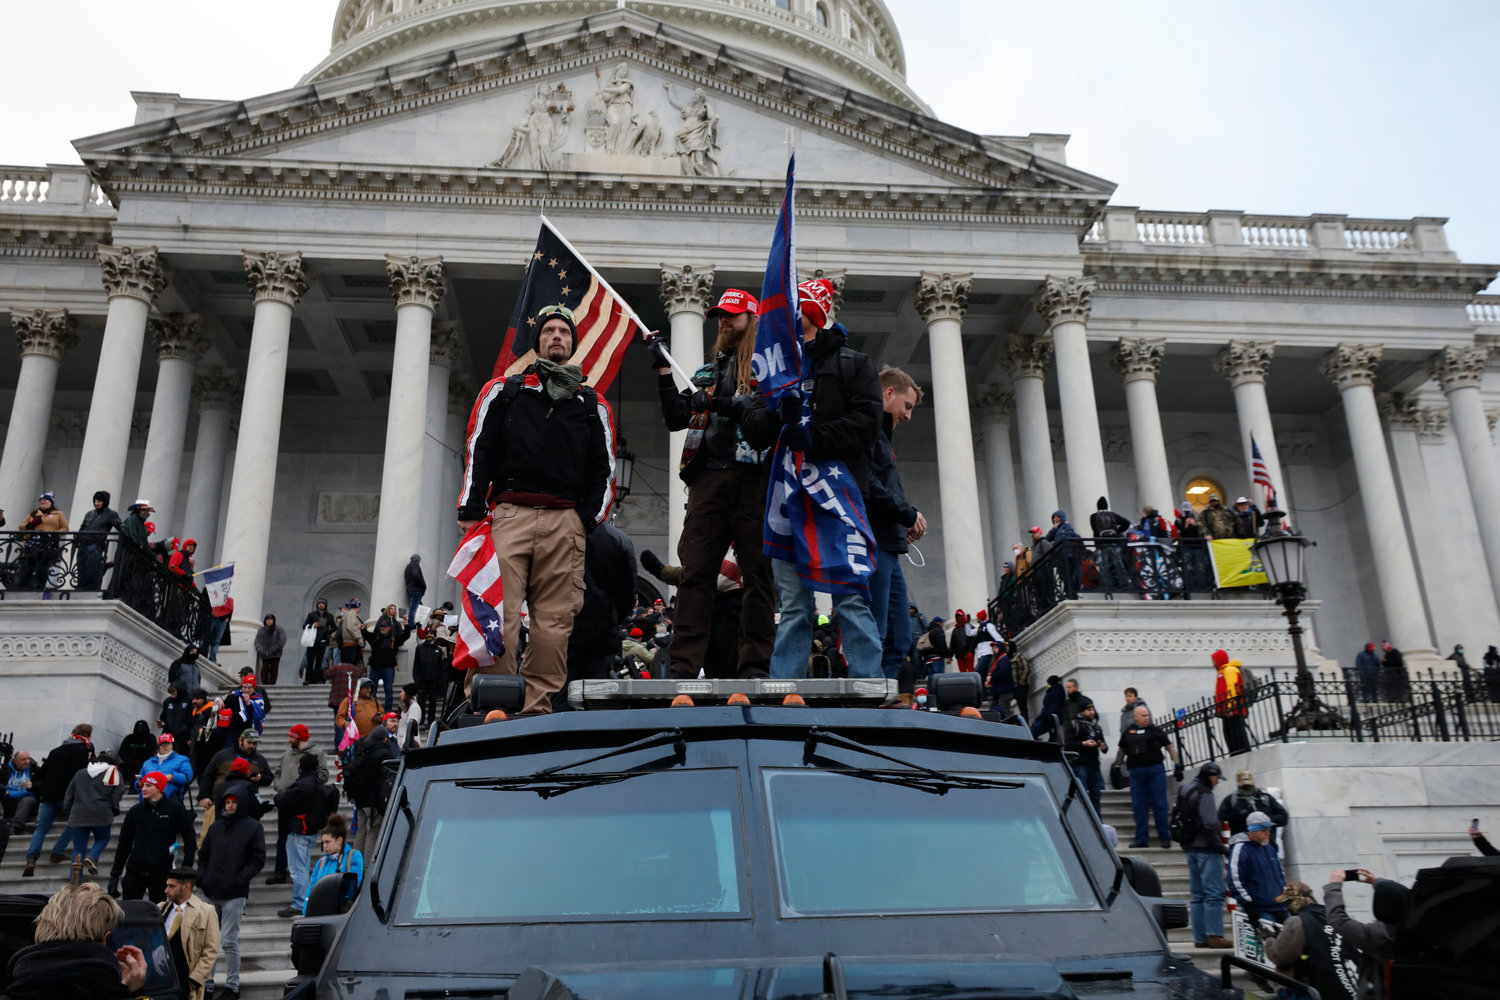 Supporters of President Donald Trump riot at the U.S. Capitol in Washington, D.C., on Wednesday, Jan. 6, 2021. House Democrats are asking for legislation to make sure that military personnel and recruits are not participating in extremist activities as was seen at the Capitol insurrection.(Yuri Gripas/Abaca Press/TNS)